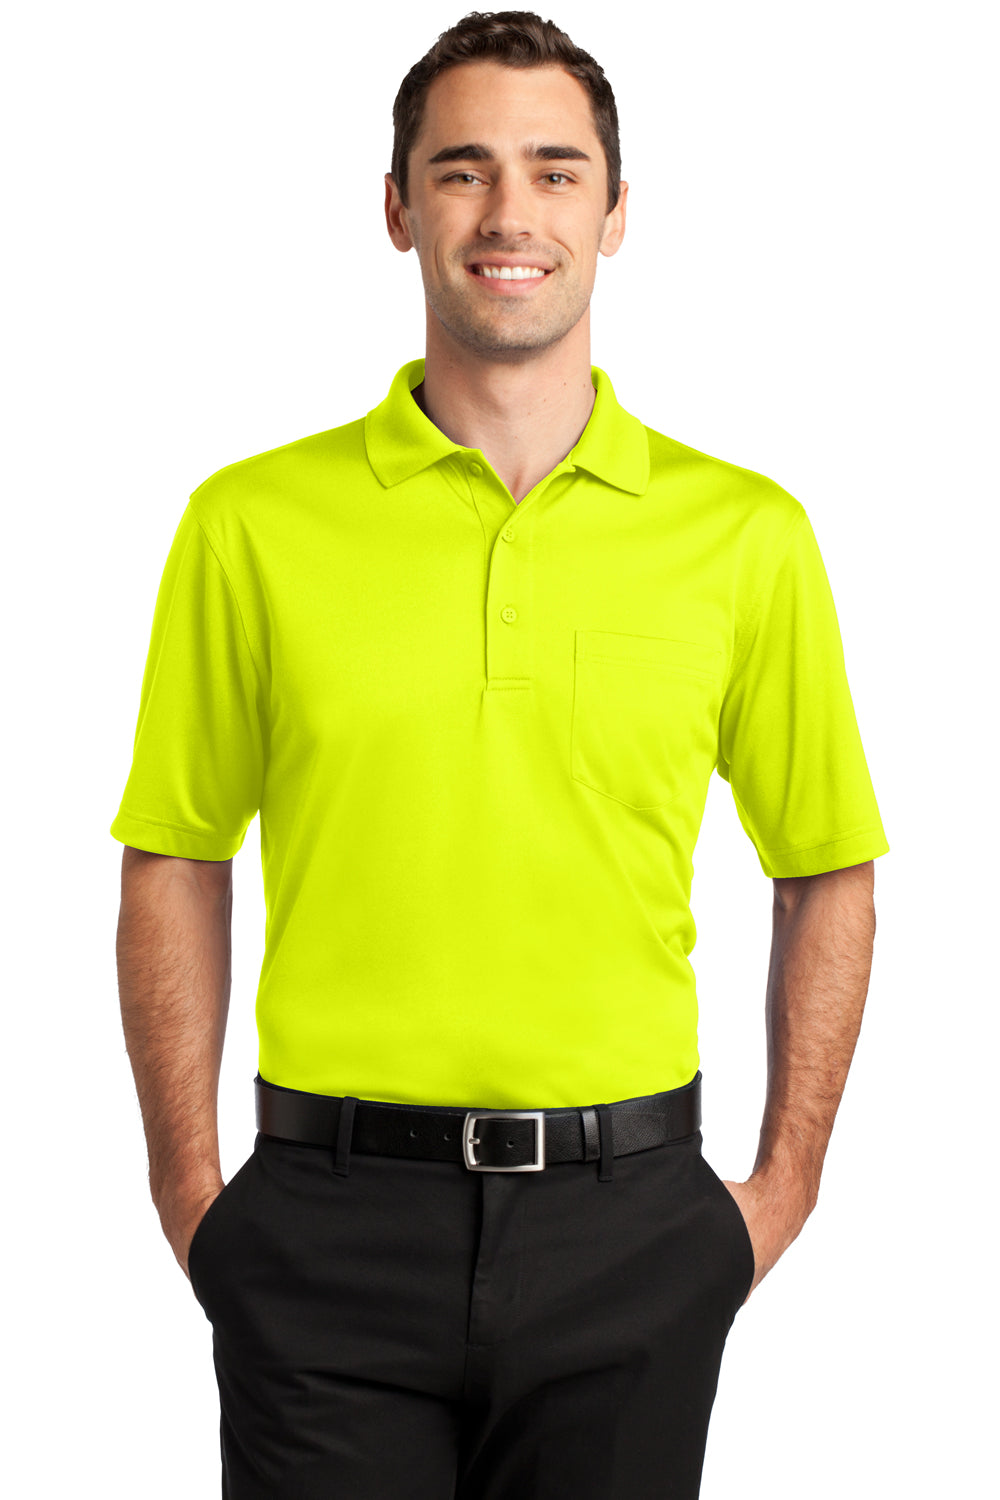 CornerStone CS412P Mens Select Moisture Wicking Short Sleeve Polo Shirt w/ Pocket Safety Yellow Front